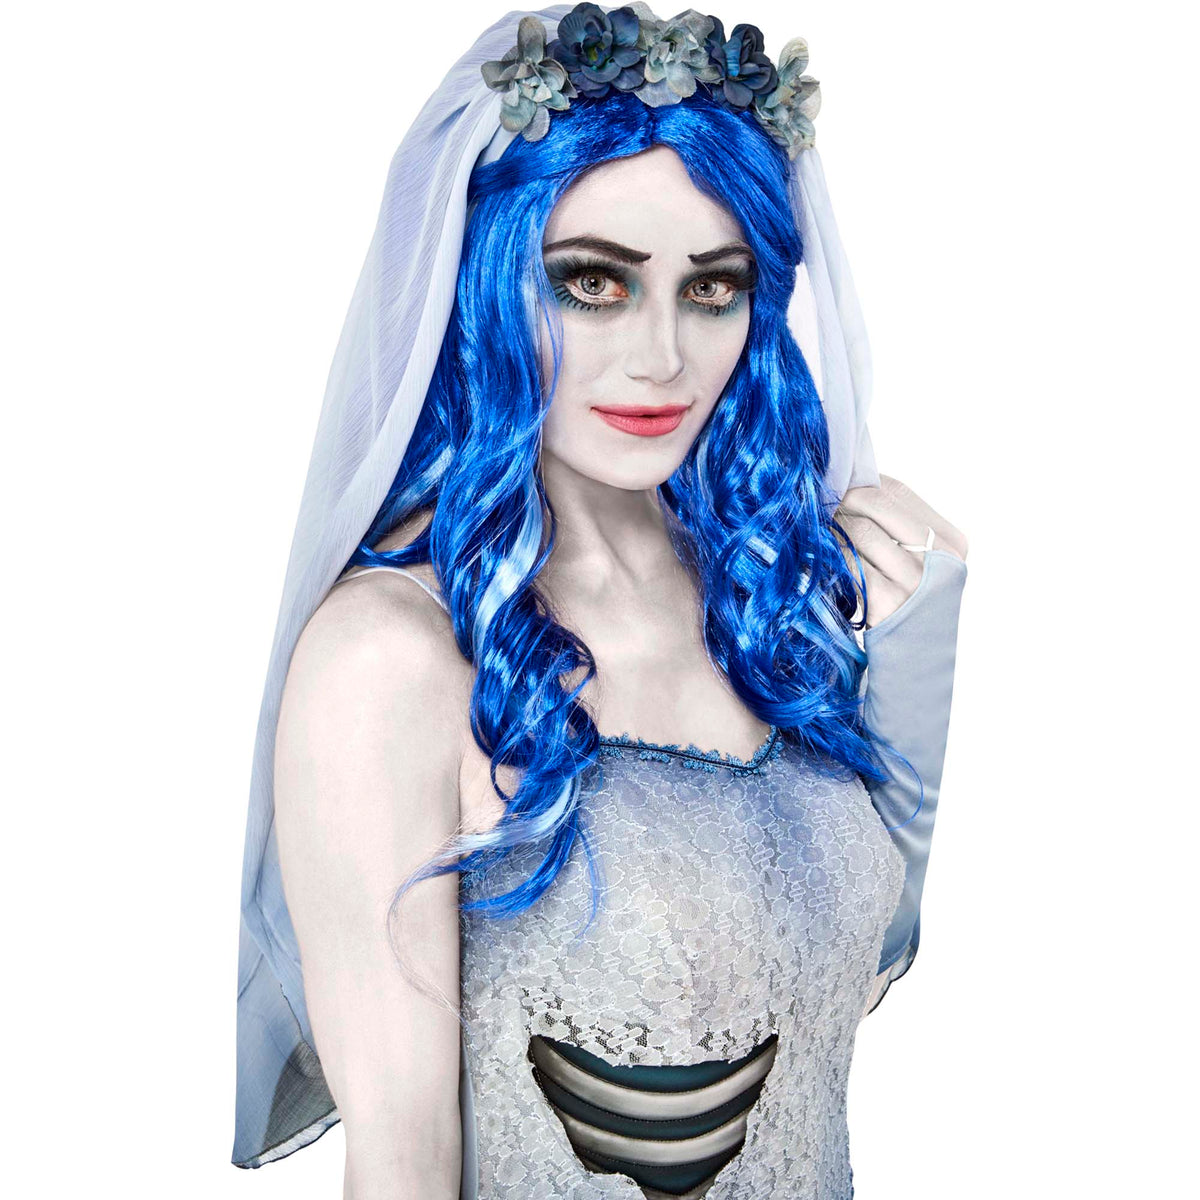 RUBIES II (Ruby Slipper Sales) Costume Accessories Emily the Corpse Bride Blue Wig for Adults